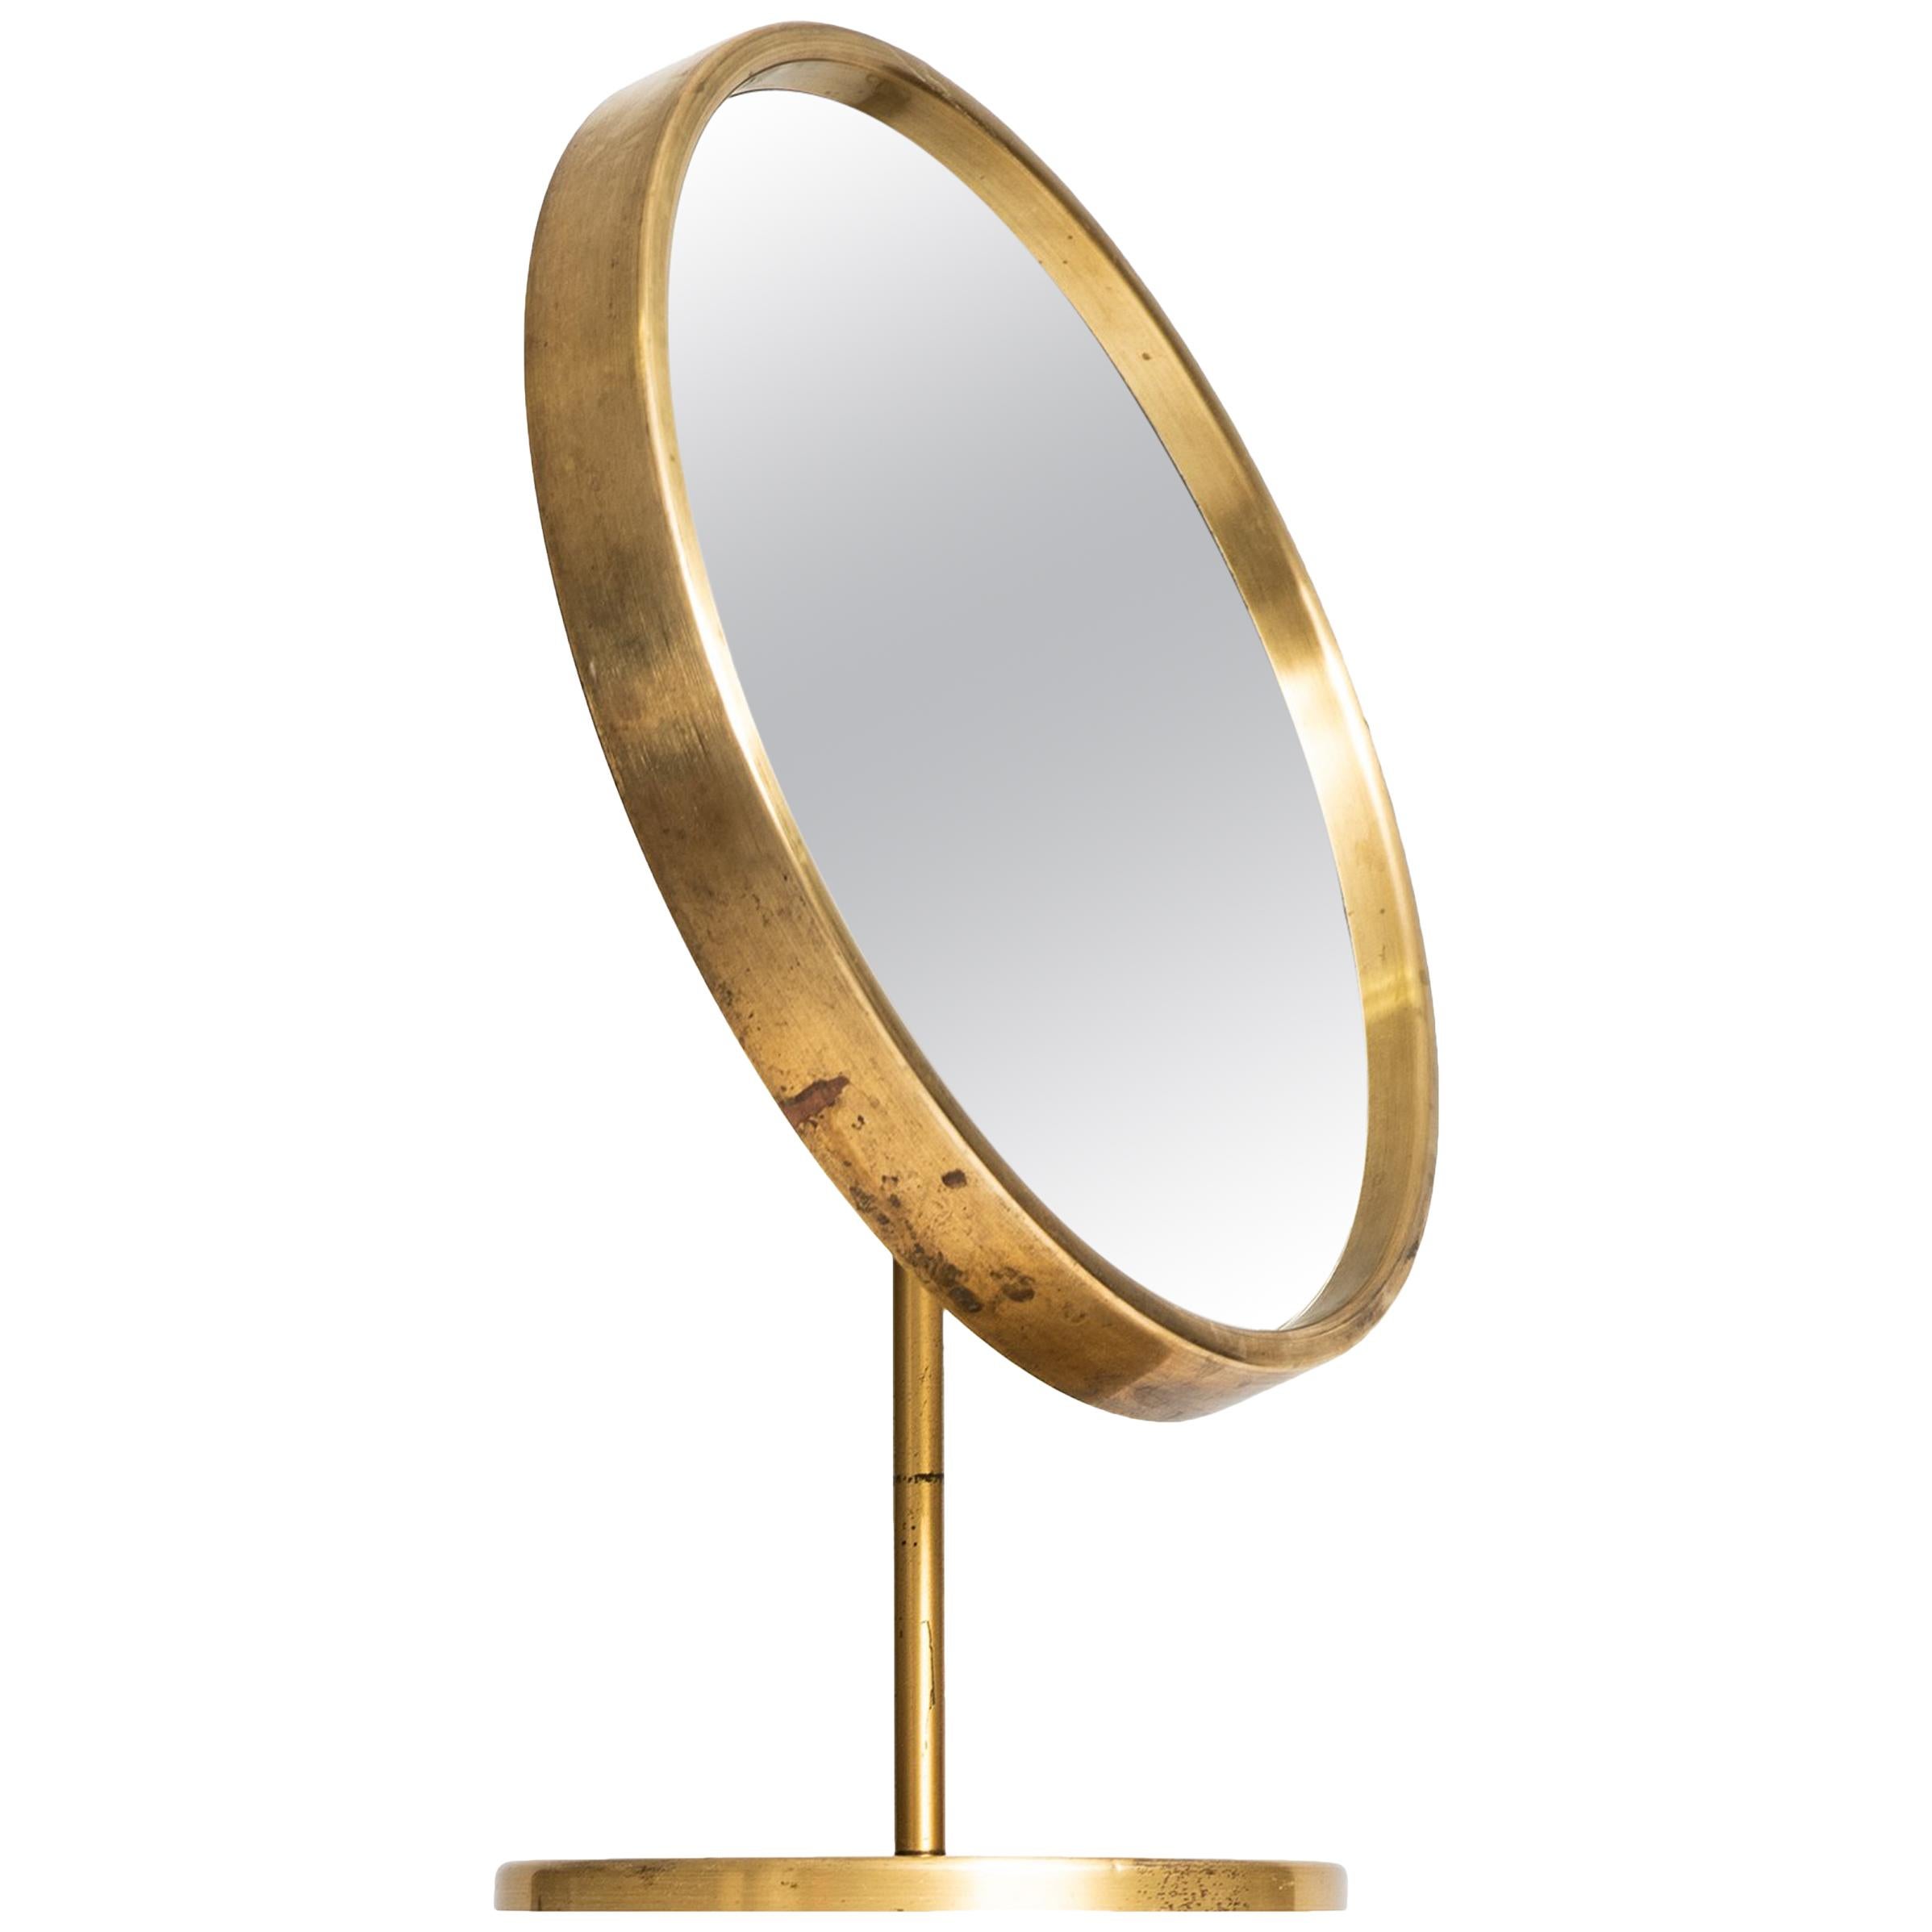 Table mirror in brass produced by Glas mäster in Sweden